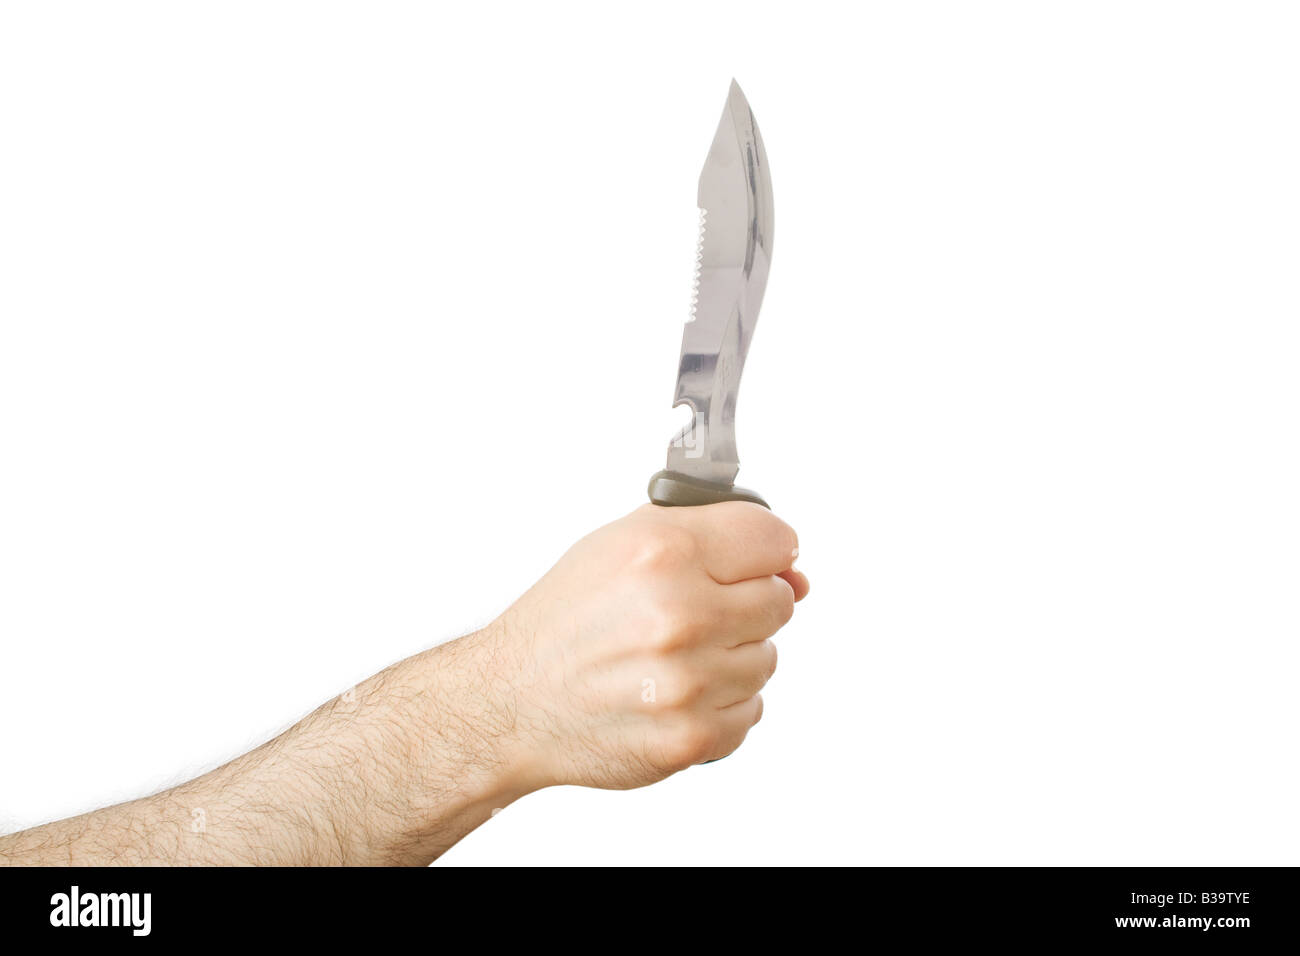 Hand holding a hunting knife in a stabbing gesture Stock Photo